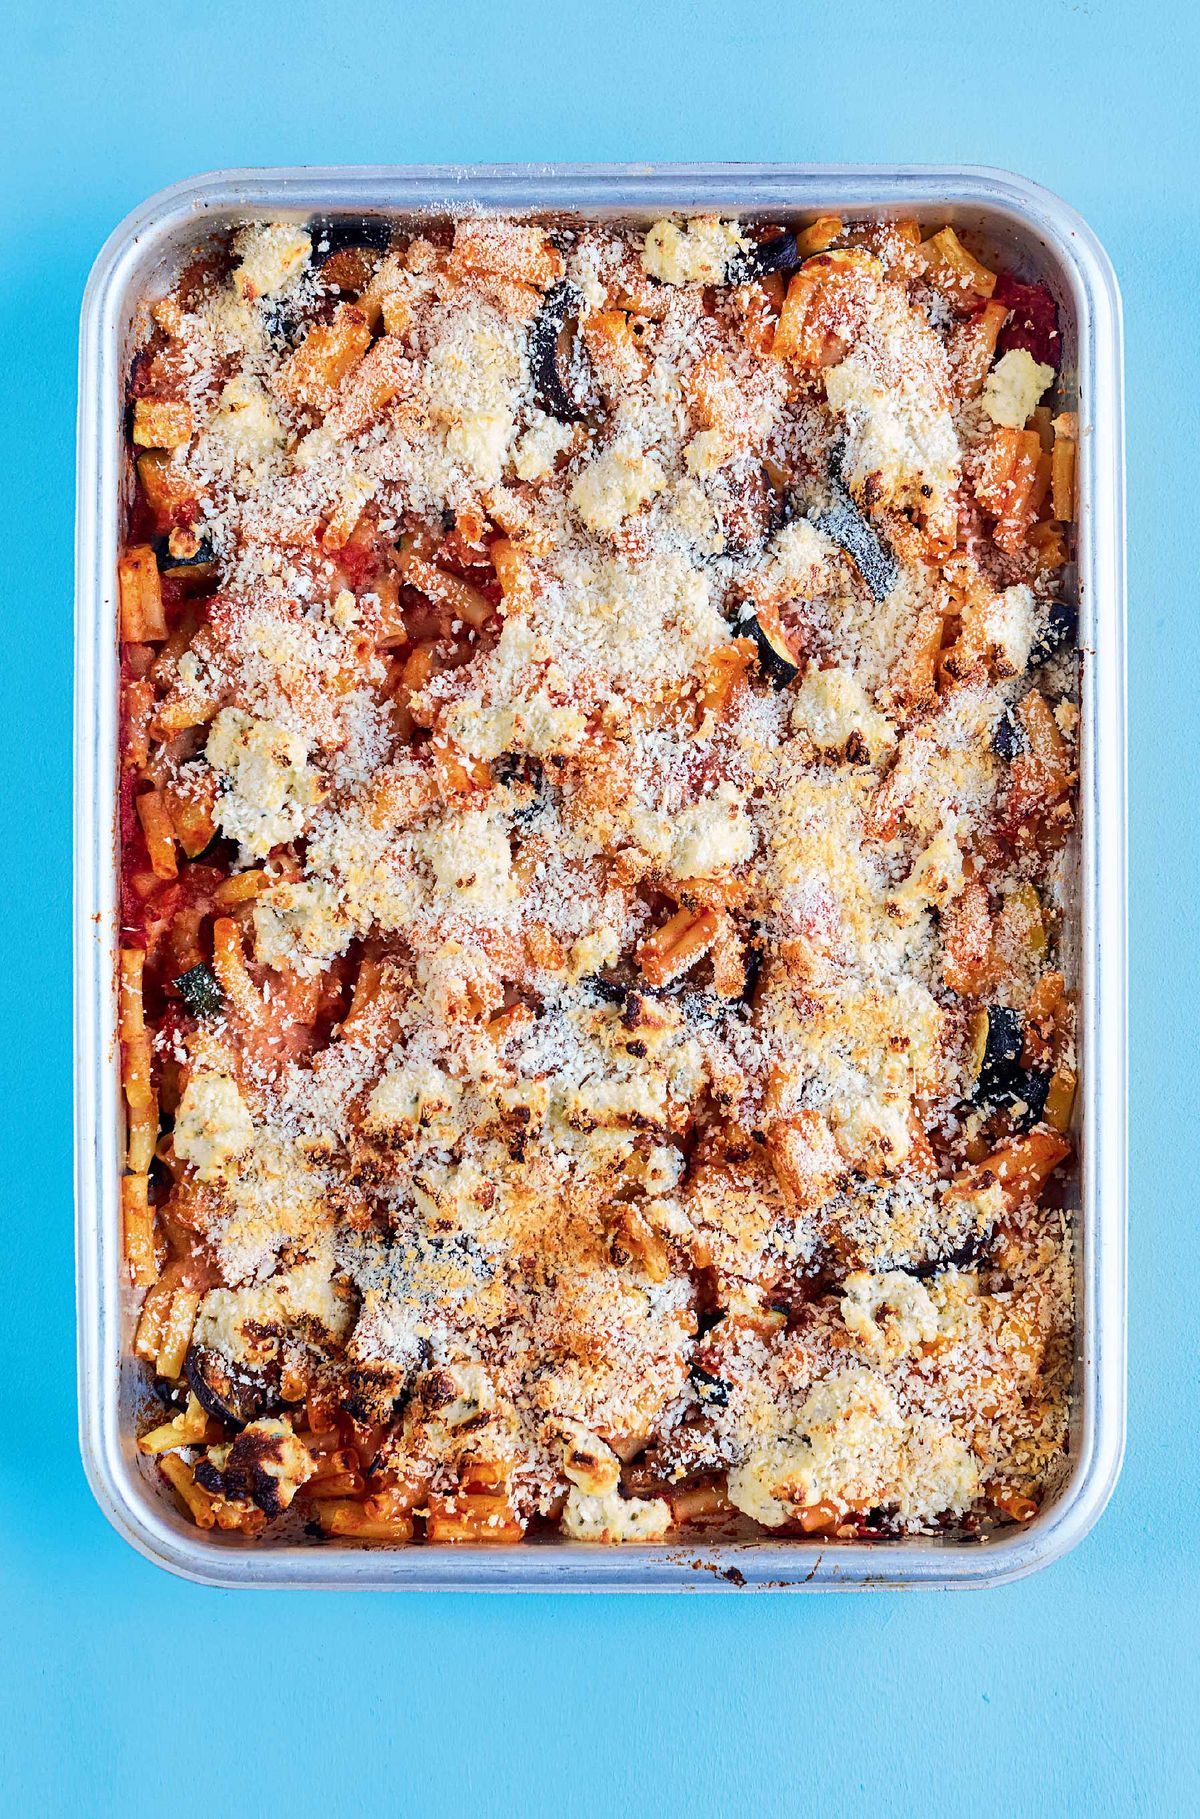 Roasted Aubergine, Courgette and Macaroni Bake